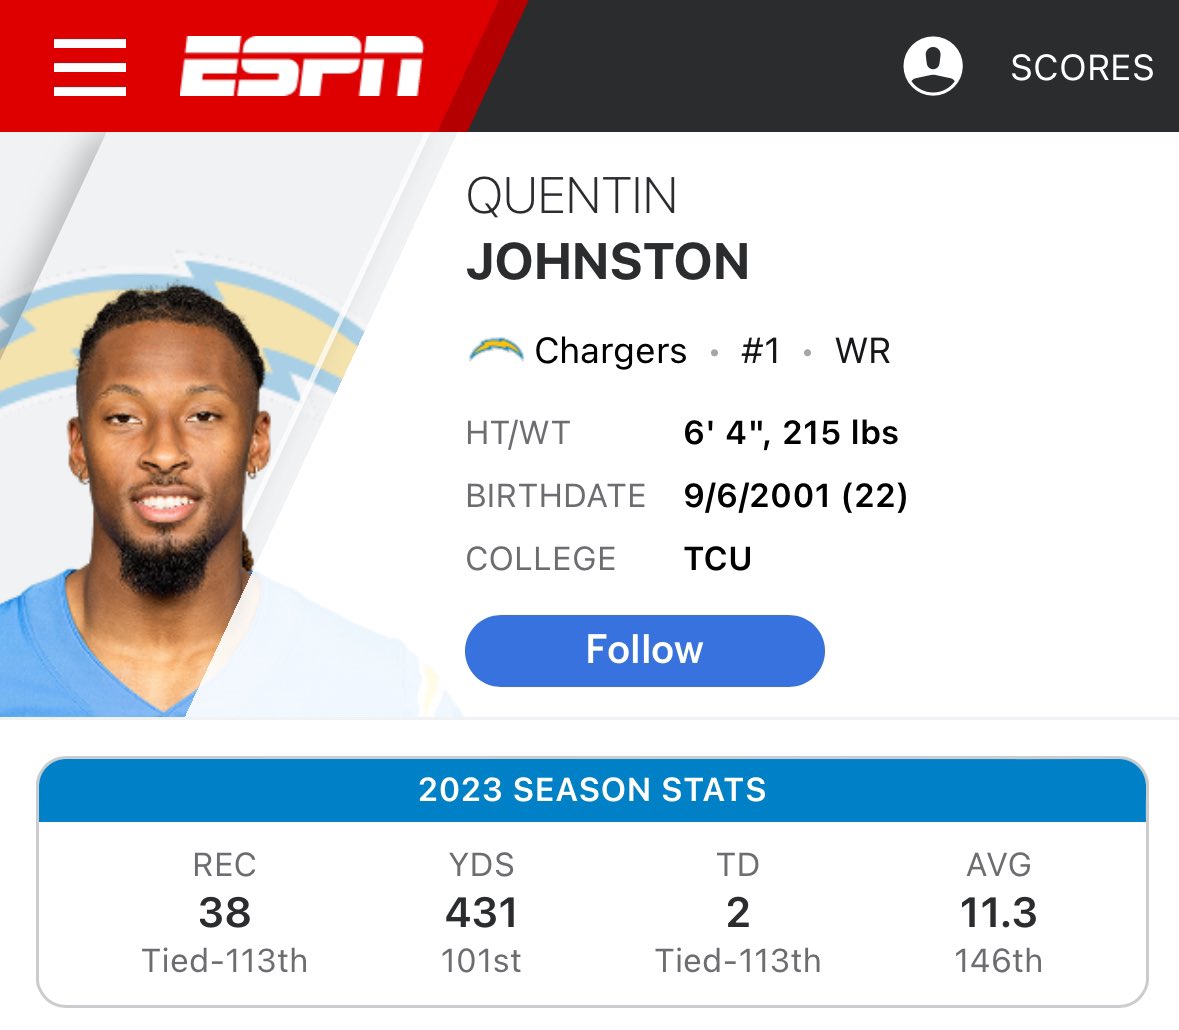 @Raghav_Jeb2024 @PFF_Fantasy That’s how bad he’s a nobody. I didn’t even know cuz name 

Don’t ever compare “Quentin Johnson” to Smitty or AJB ever again